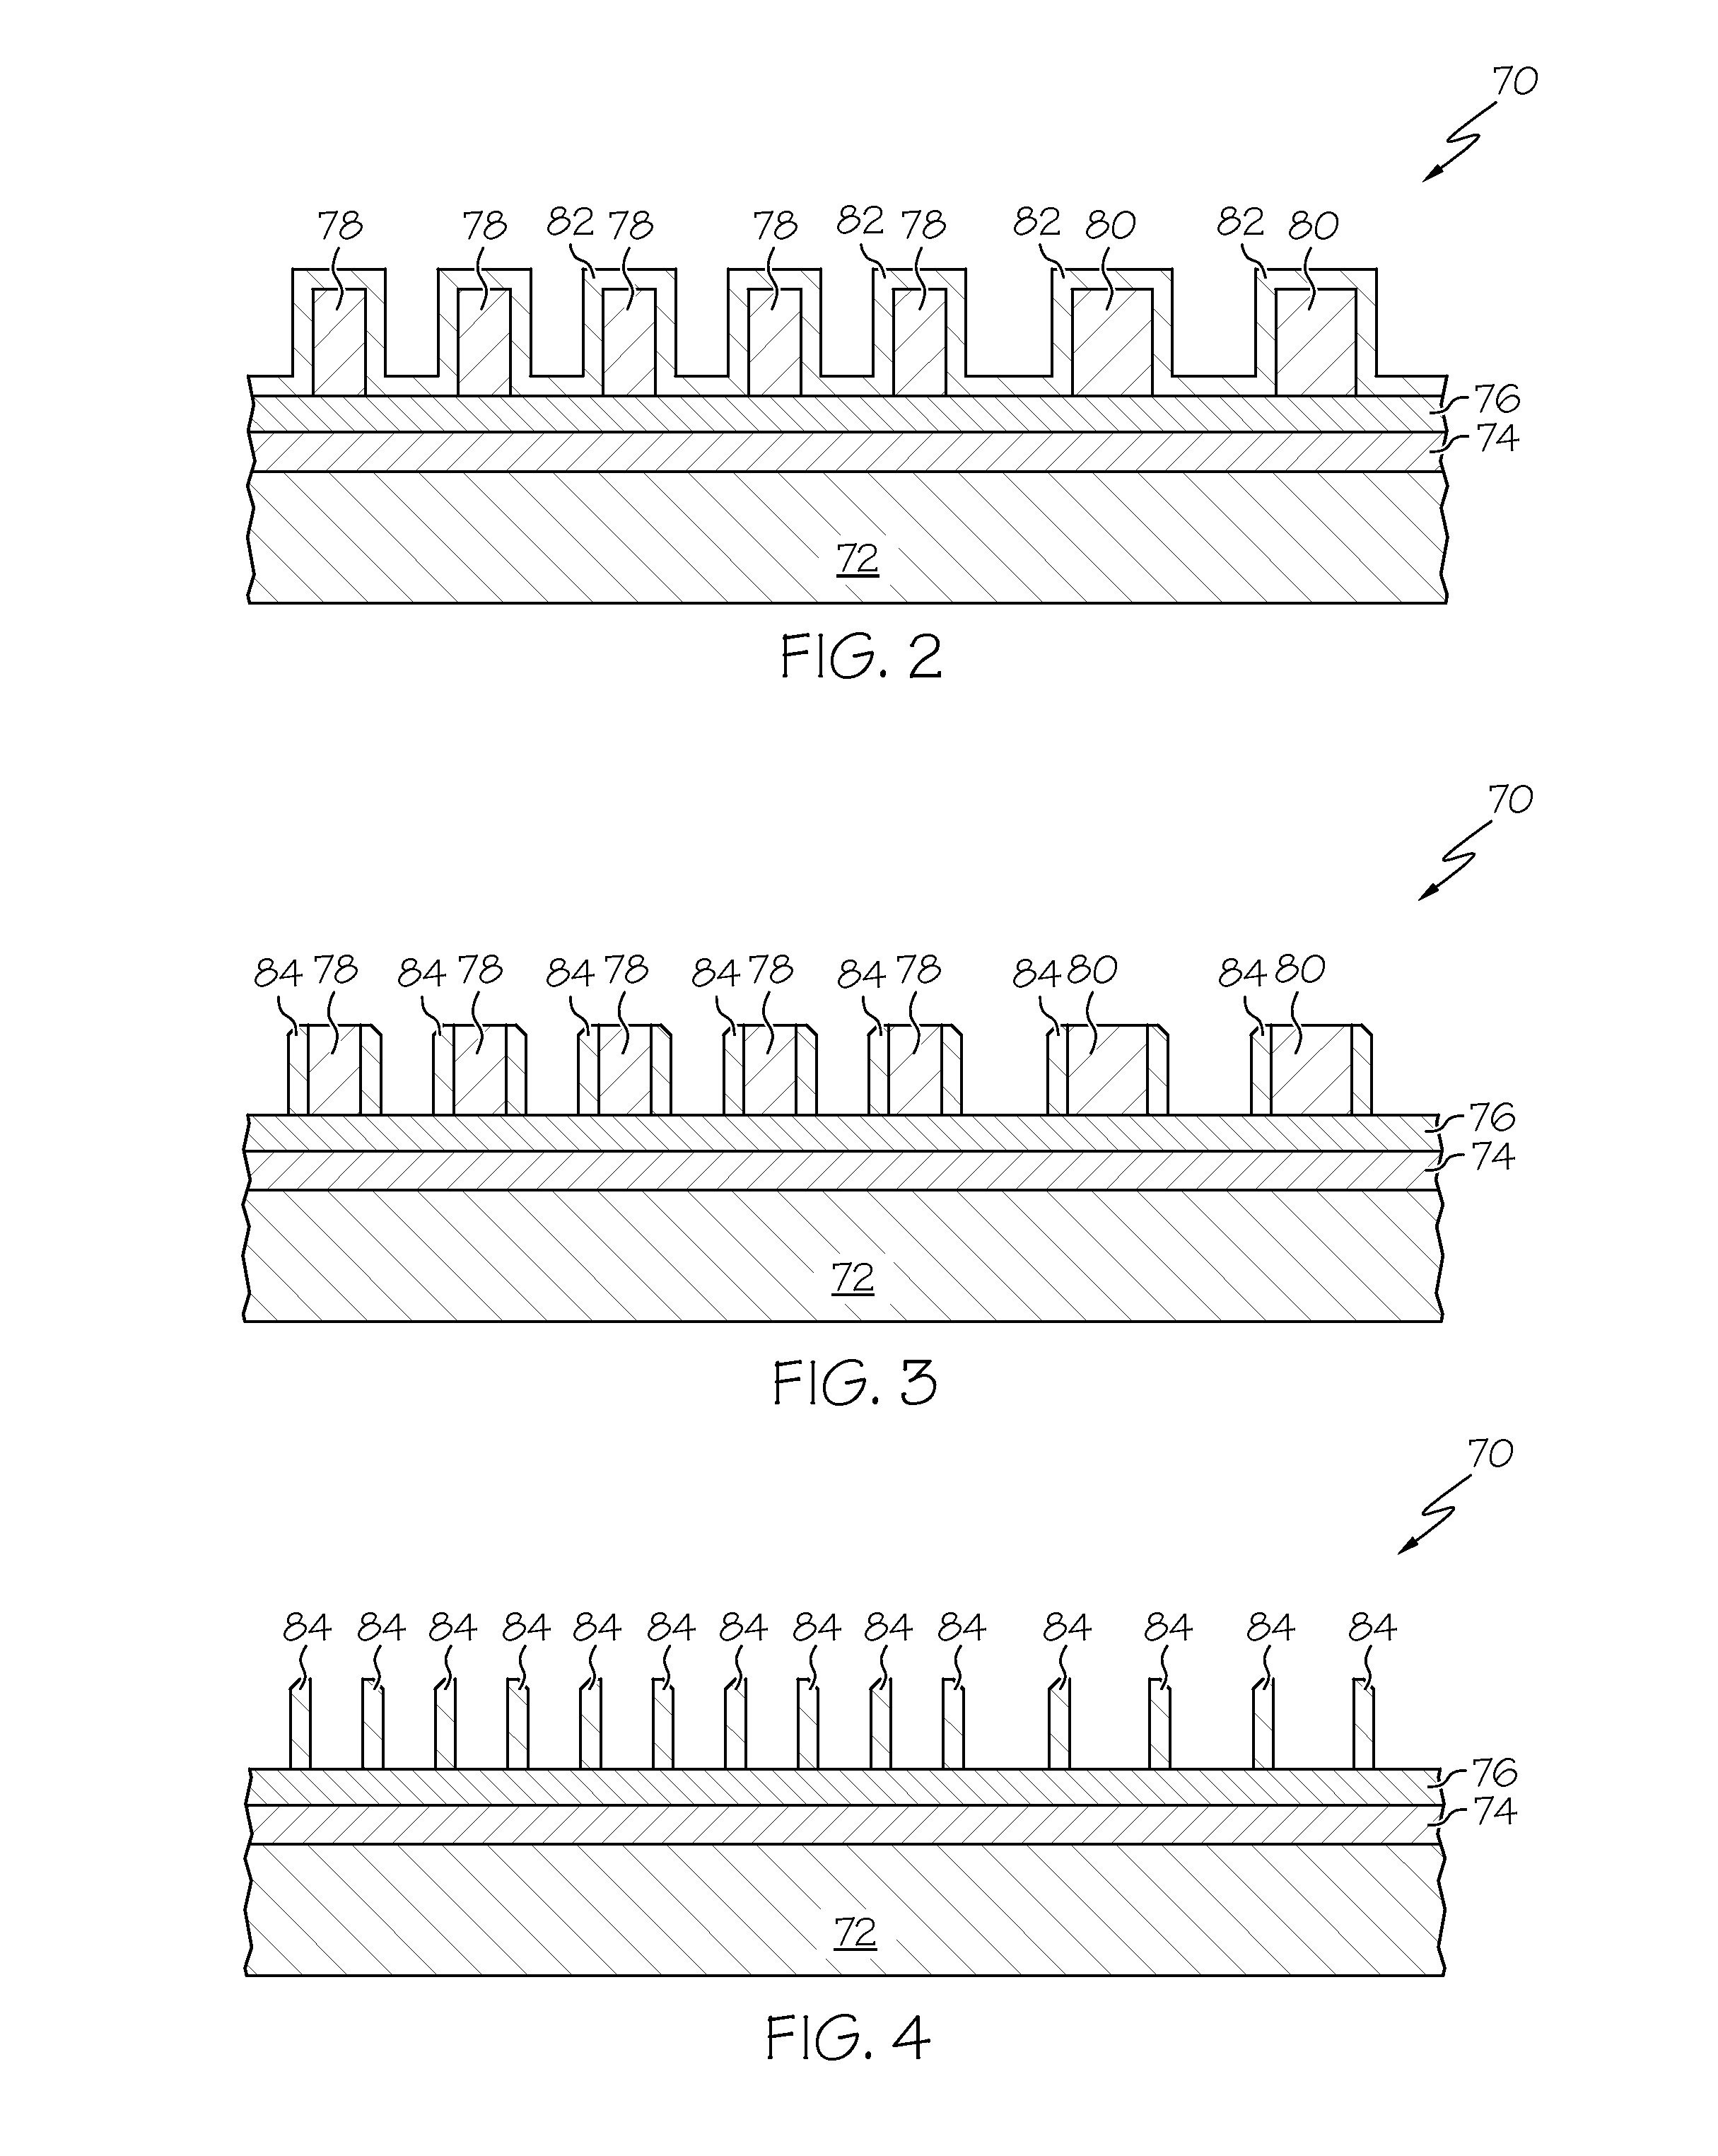 Methods for fabricating finfet integrated circuits on bulk semiconductor substrates